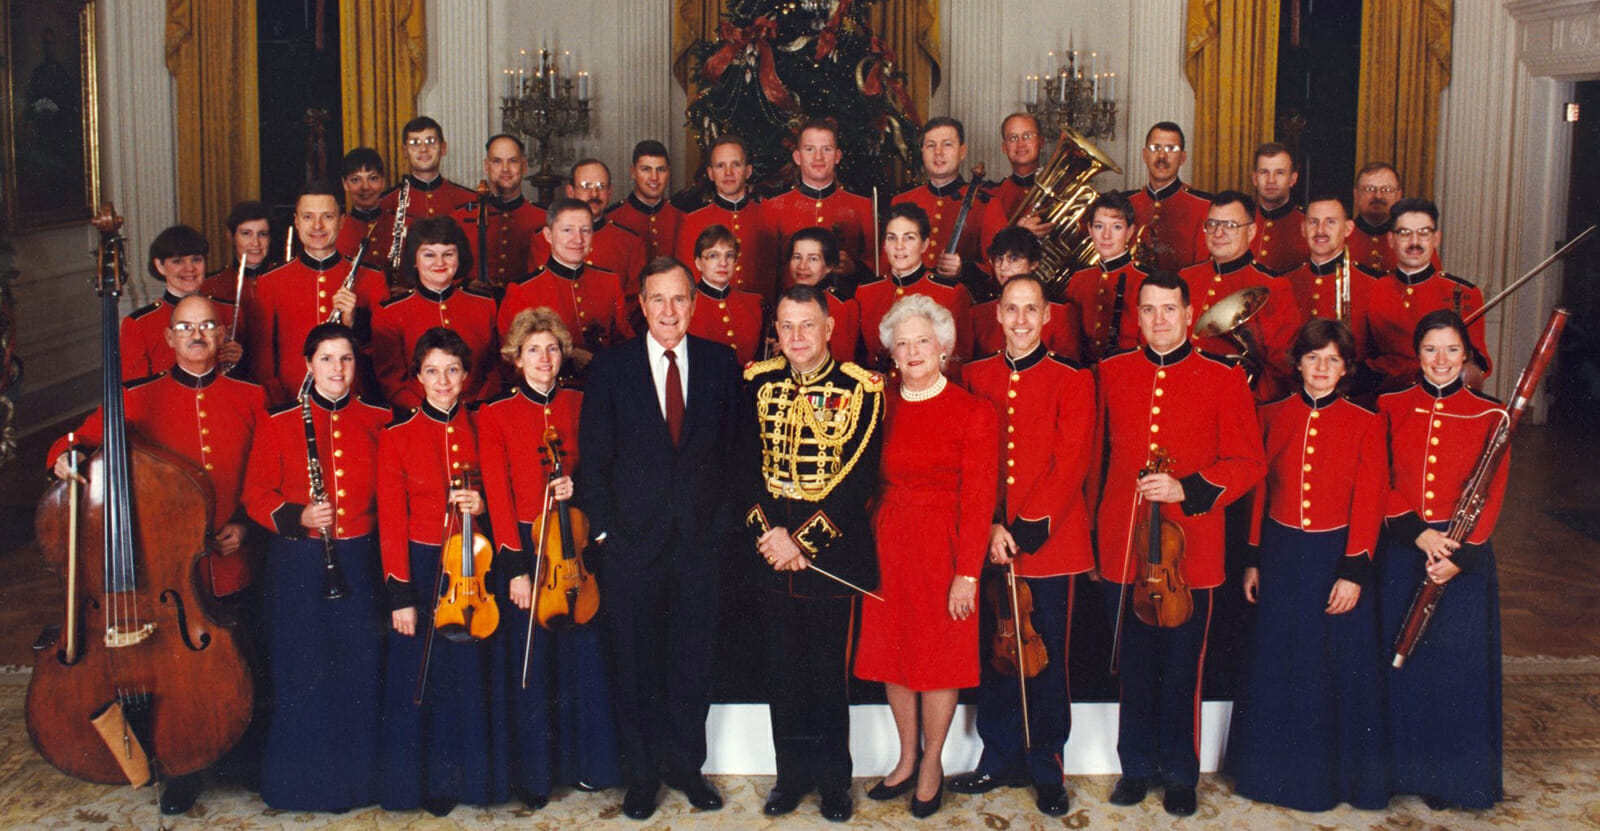 President and Mrs. George H. W. Bush with the U.S. Marine Corps Orchestra at the White House, 1991